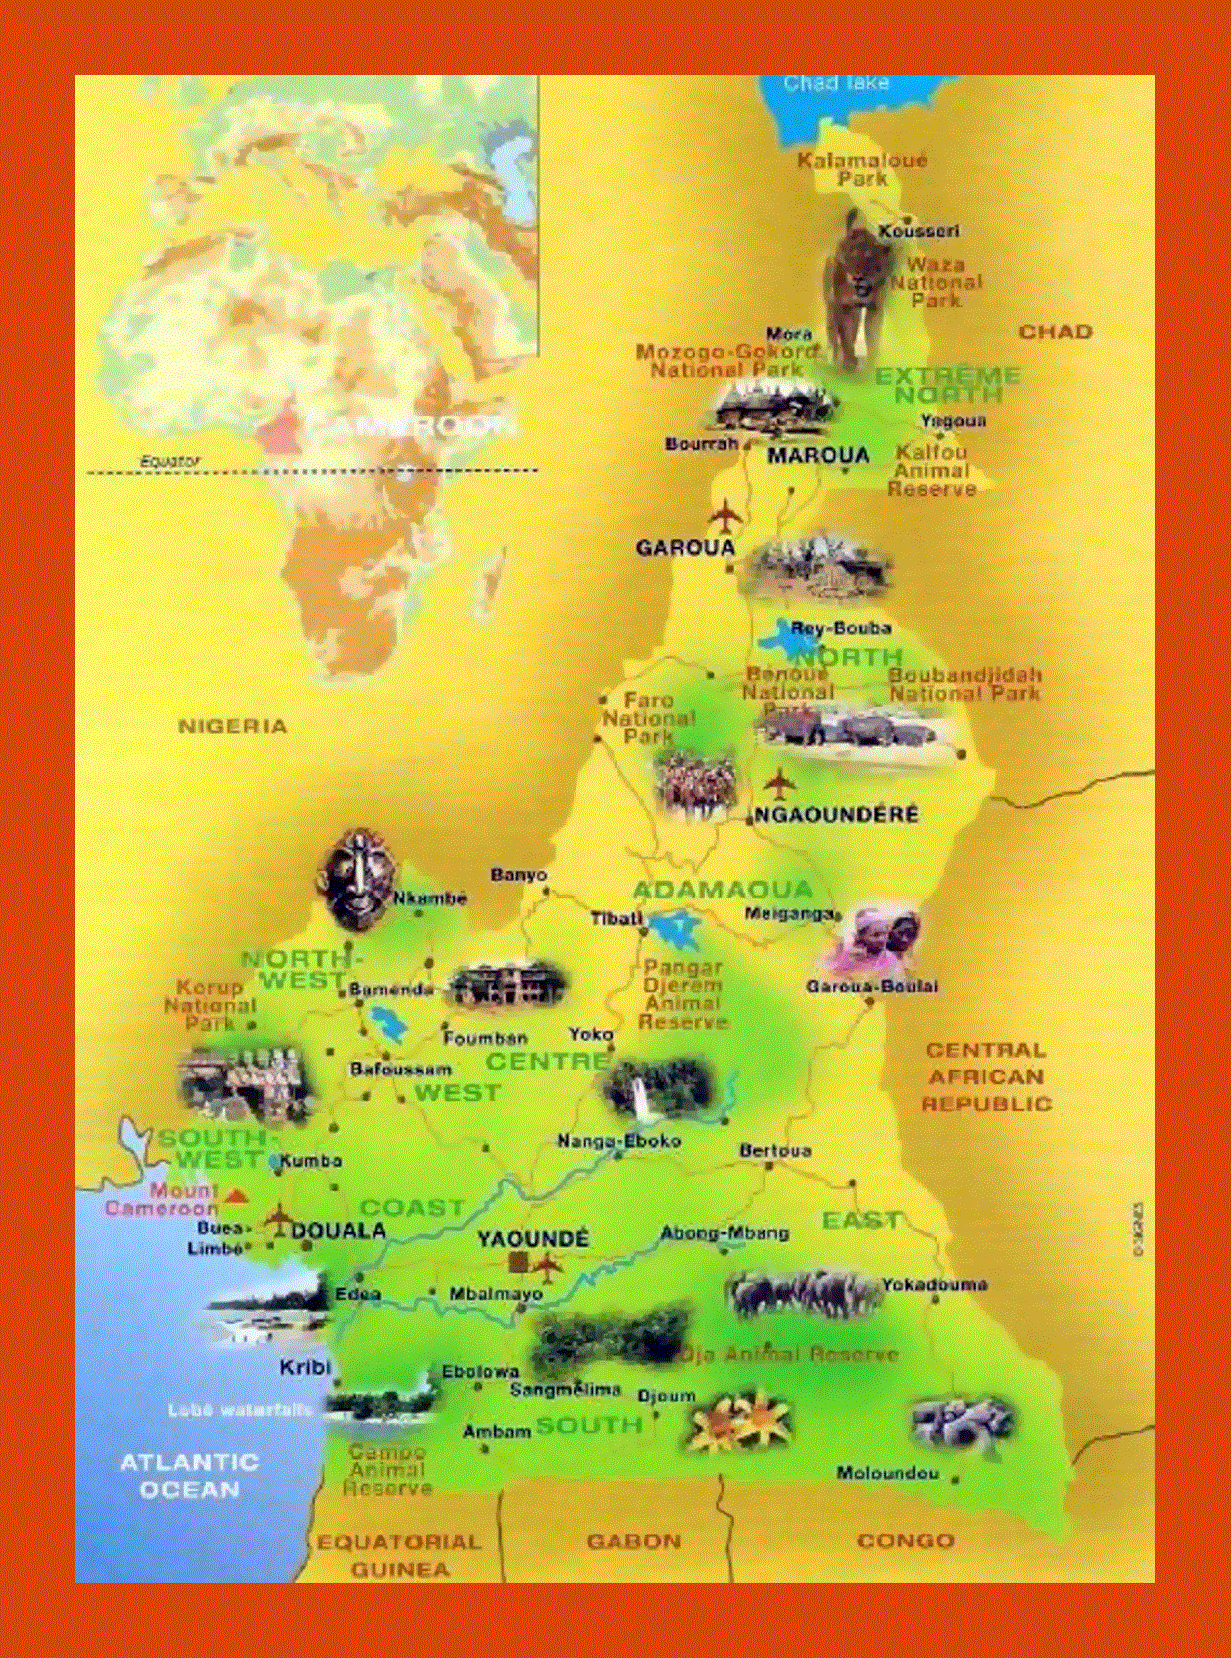 Tourist map of Cameroon